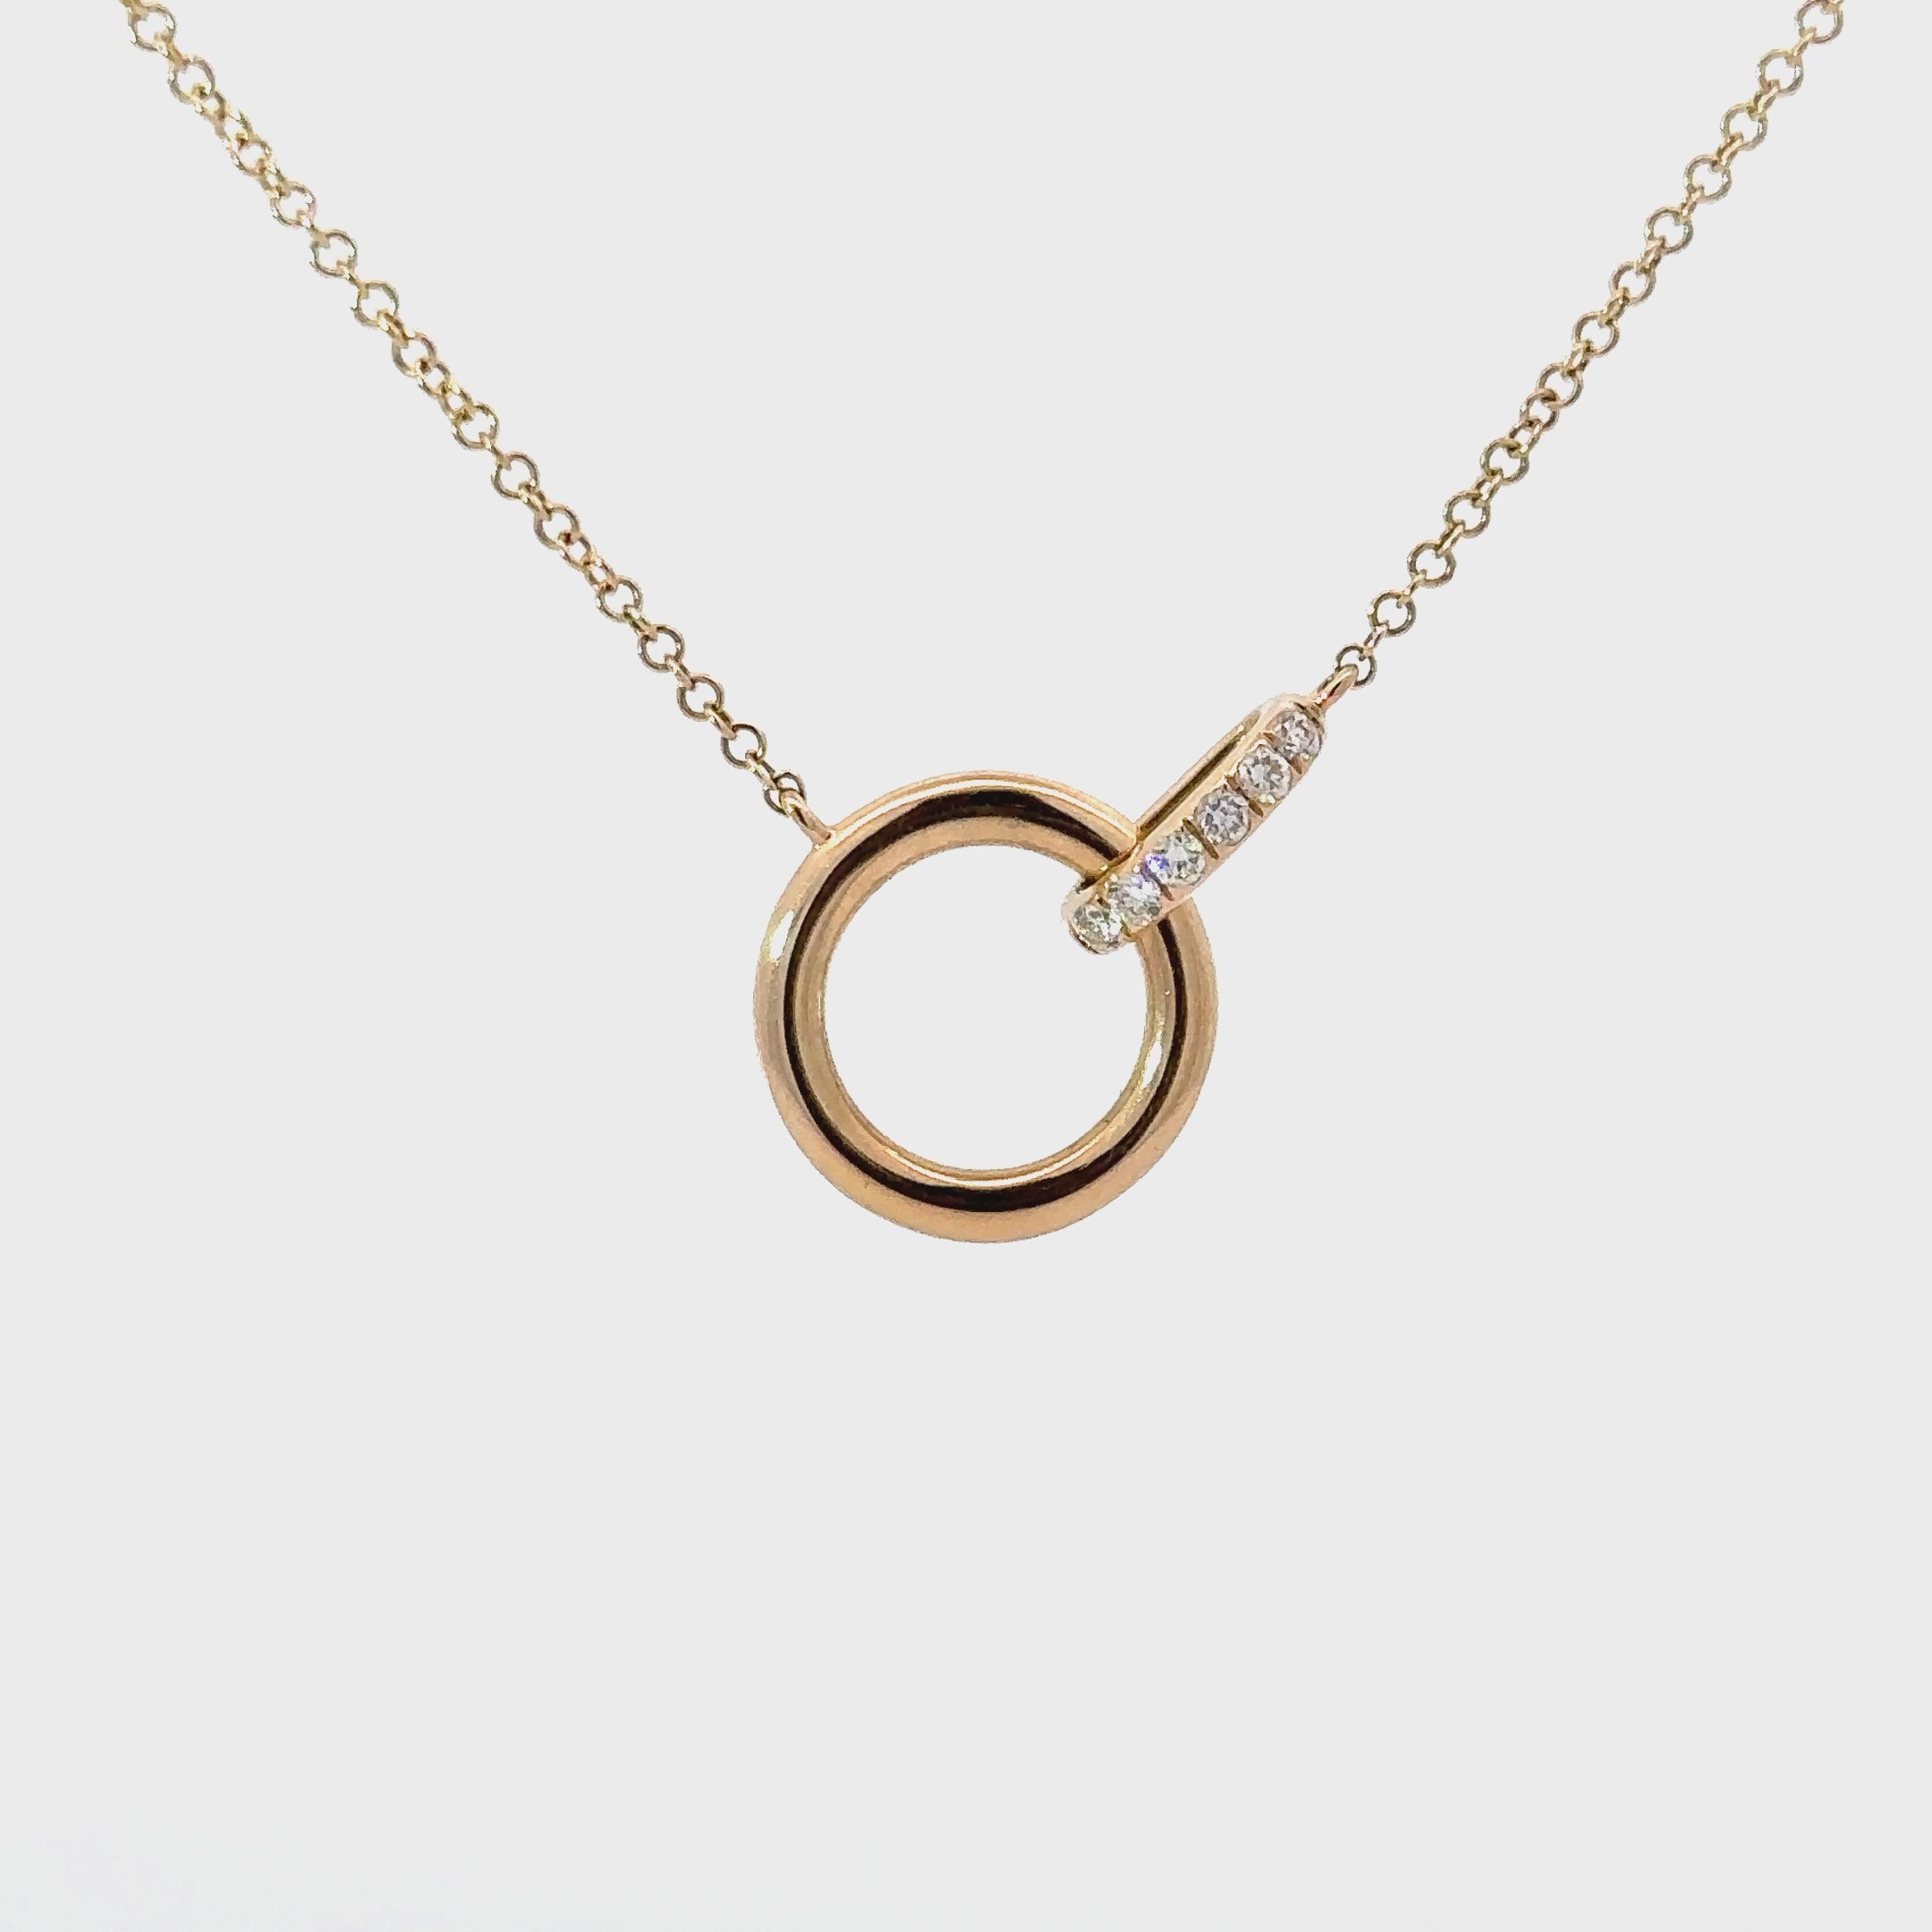 Bassali of New York- 14ky inter linked circle necklace